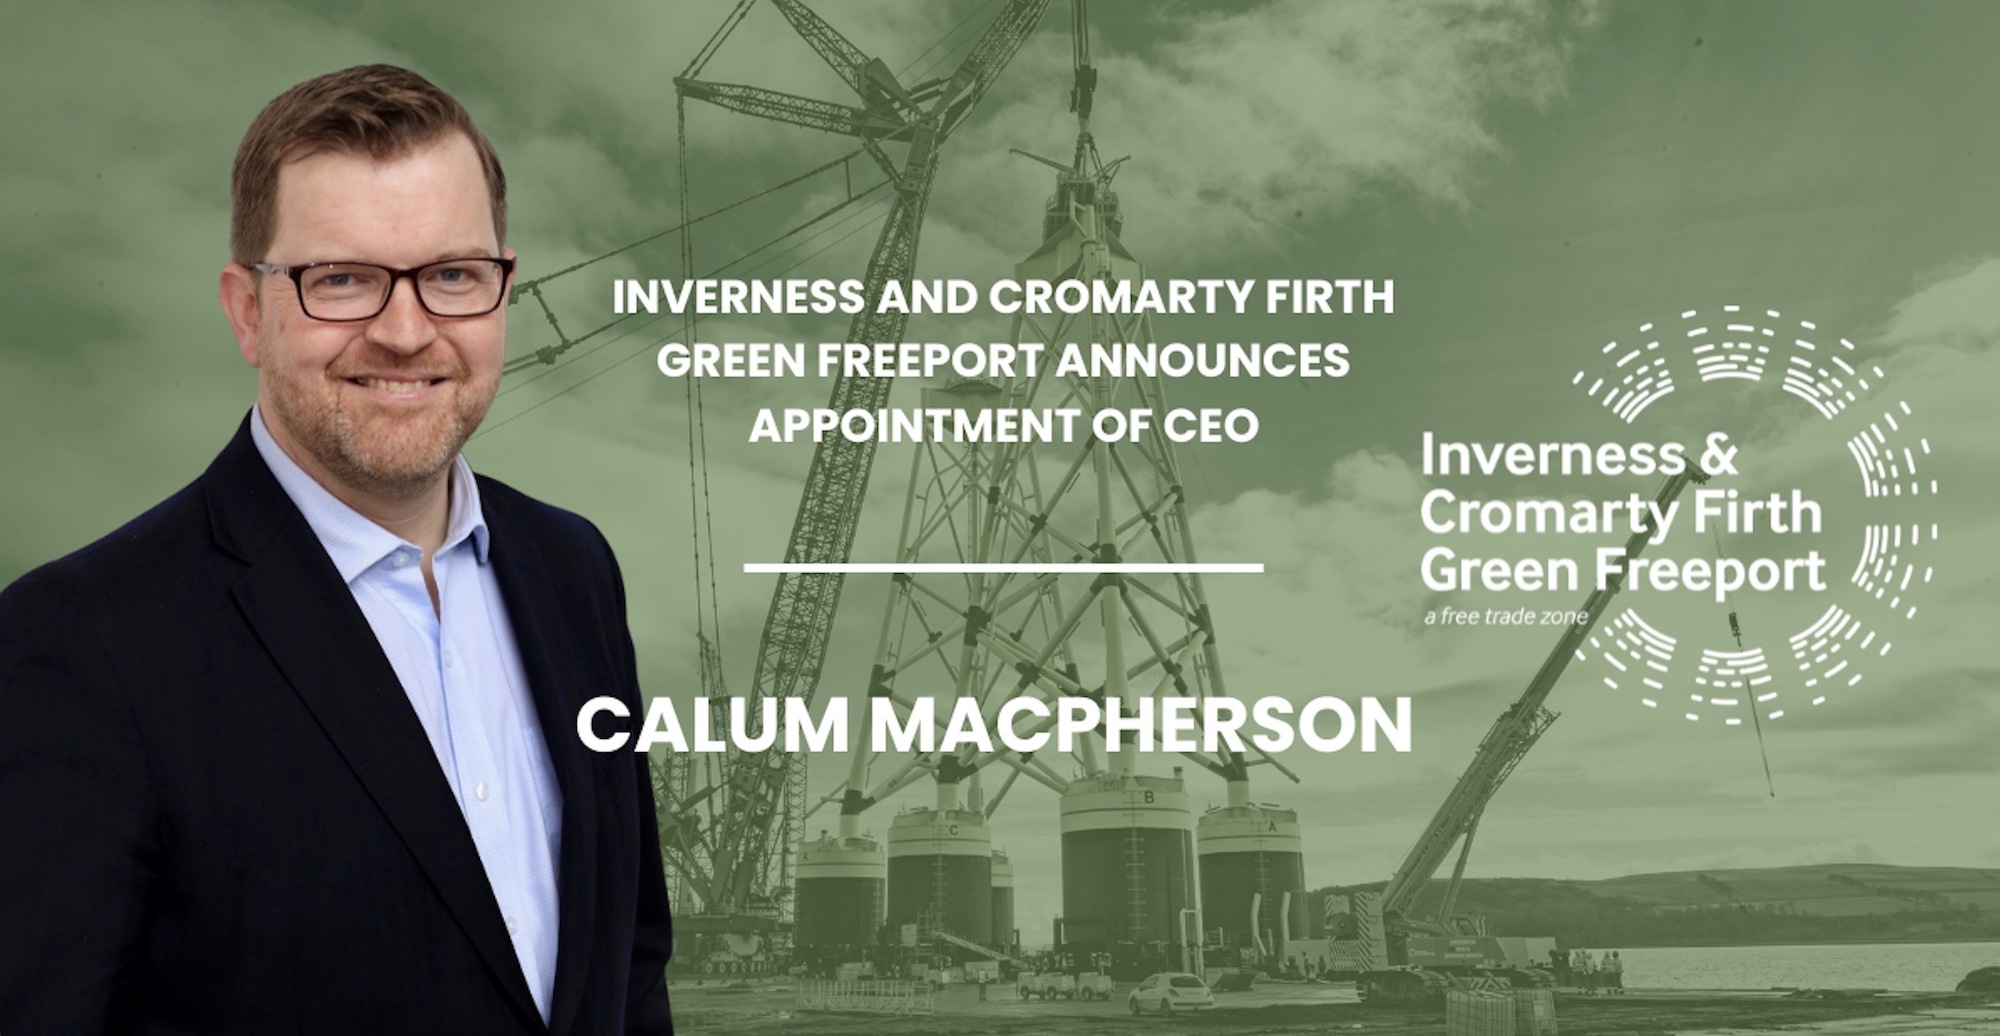 Former Robertson Group director takes helm at Inverness and Cromarty Firth Green Freeport